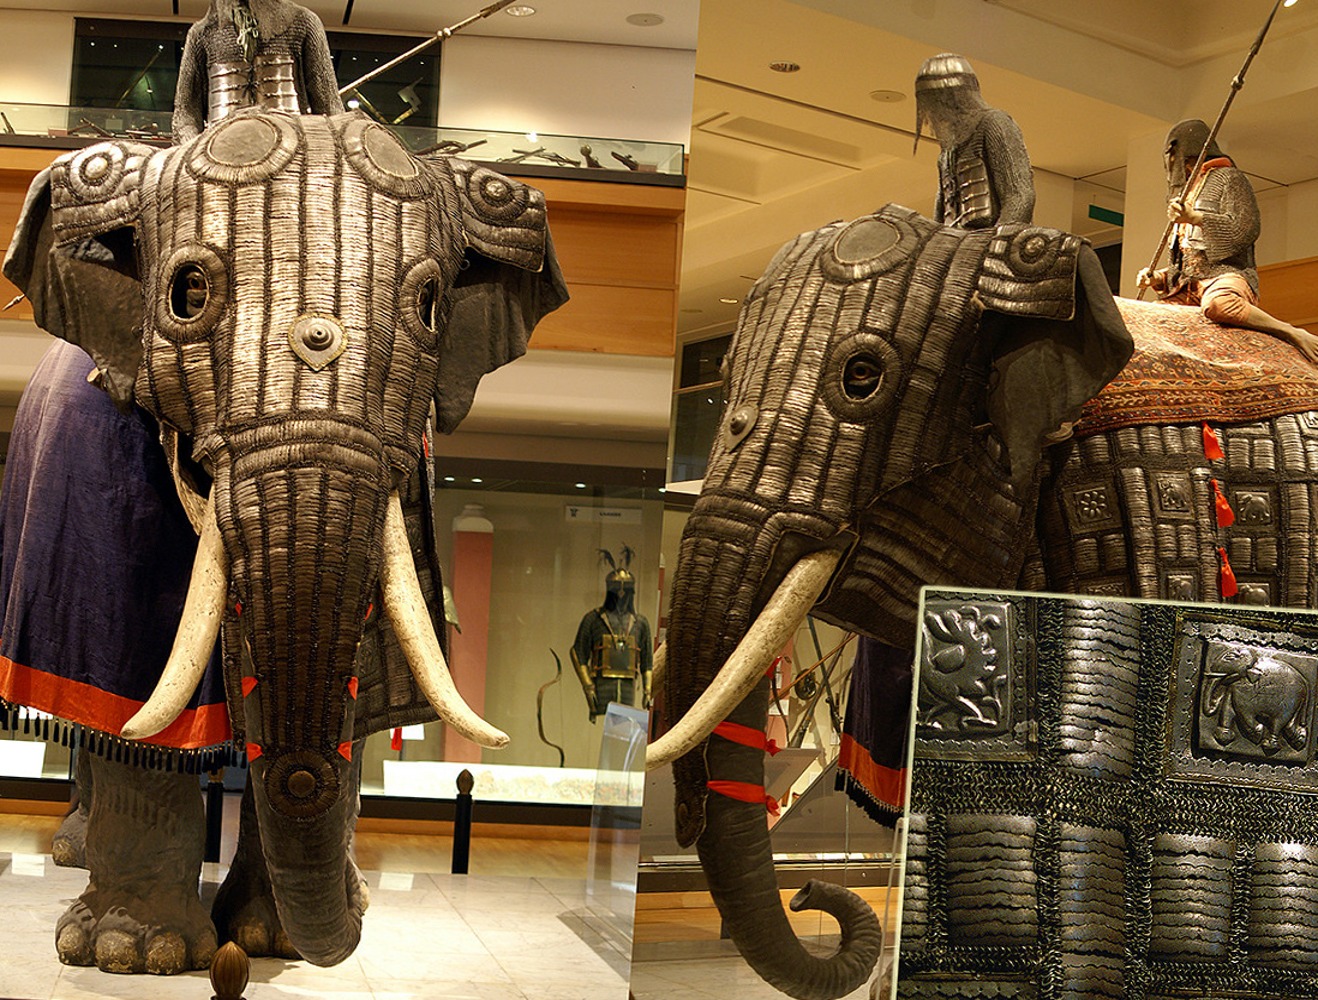 Elephant armour from 17th century (India). It's composed of 5,840 plates and weighs 118kg.jpg